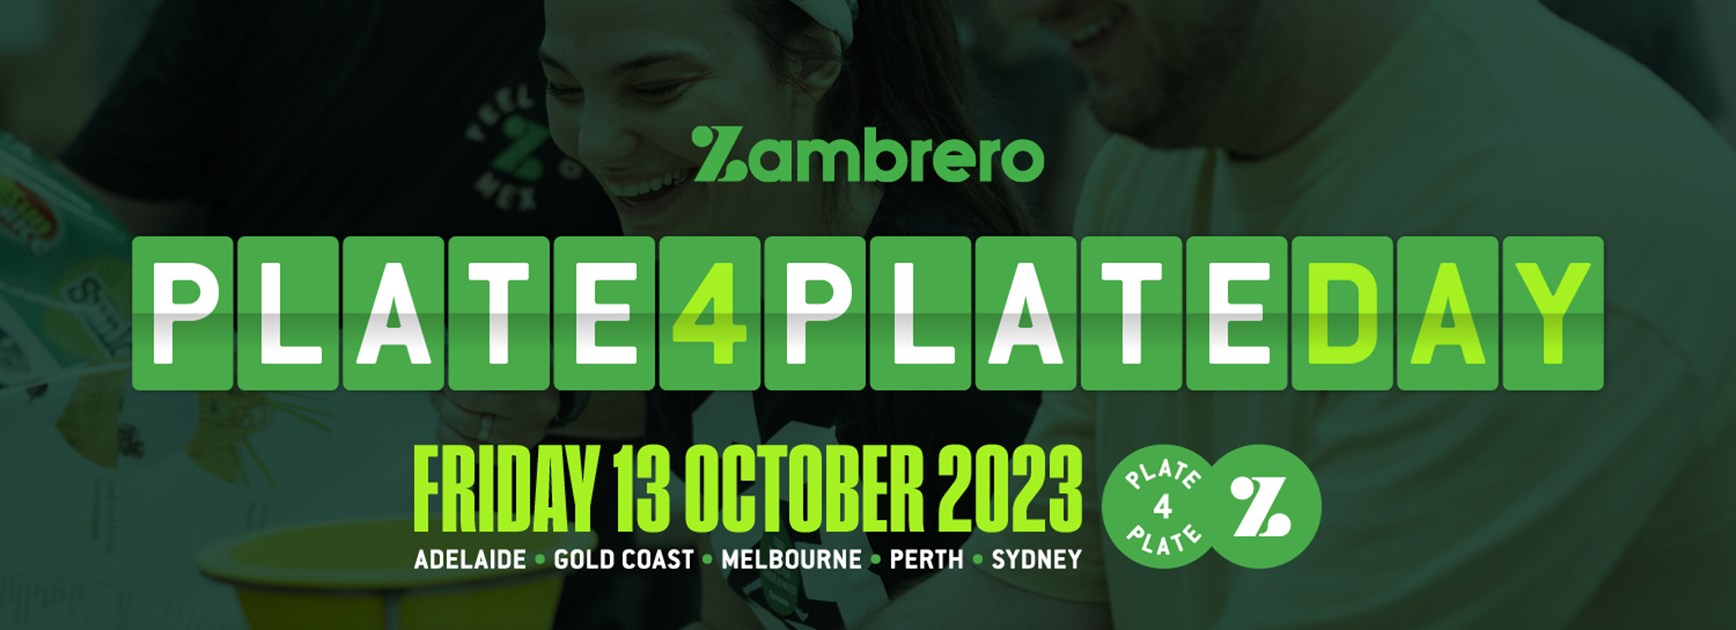 Sharks supporting Zambrero's 2023 Plate 4 Plate Day